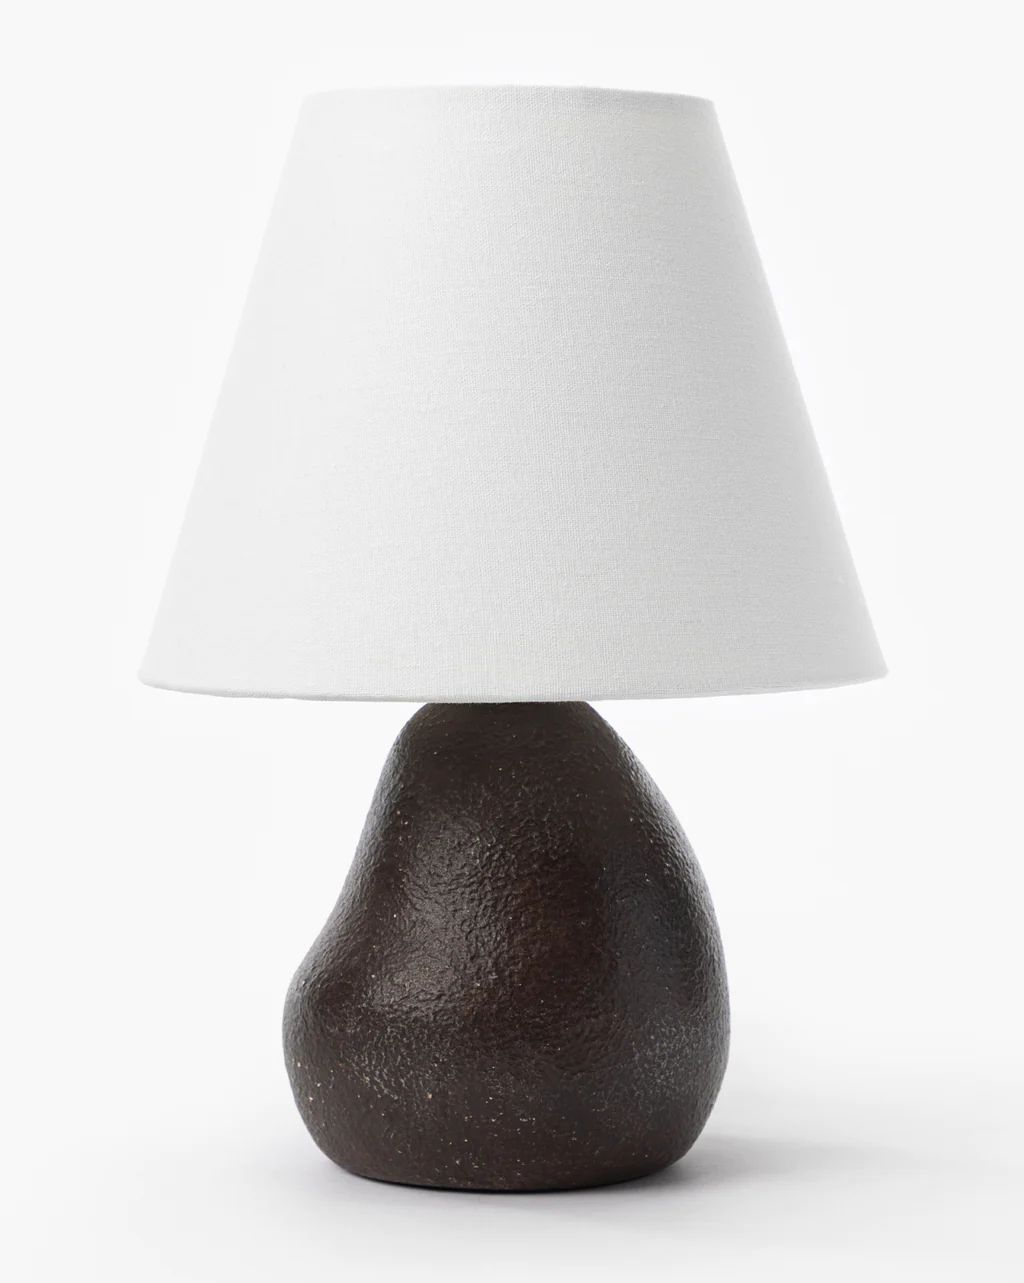 Vedruna Table Lamp | McGee & Co.